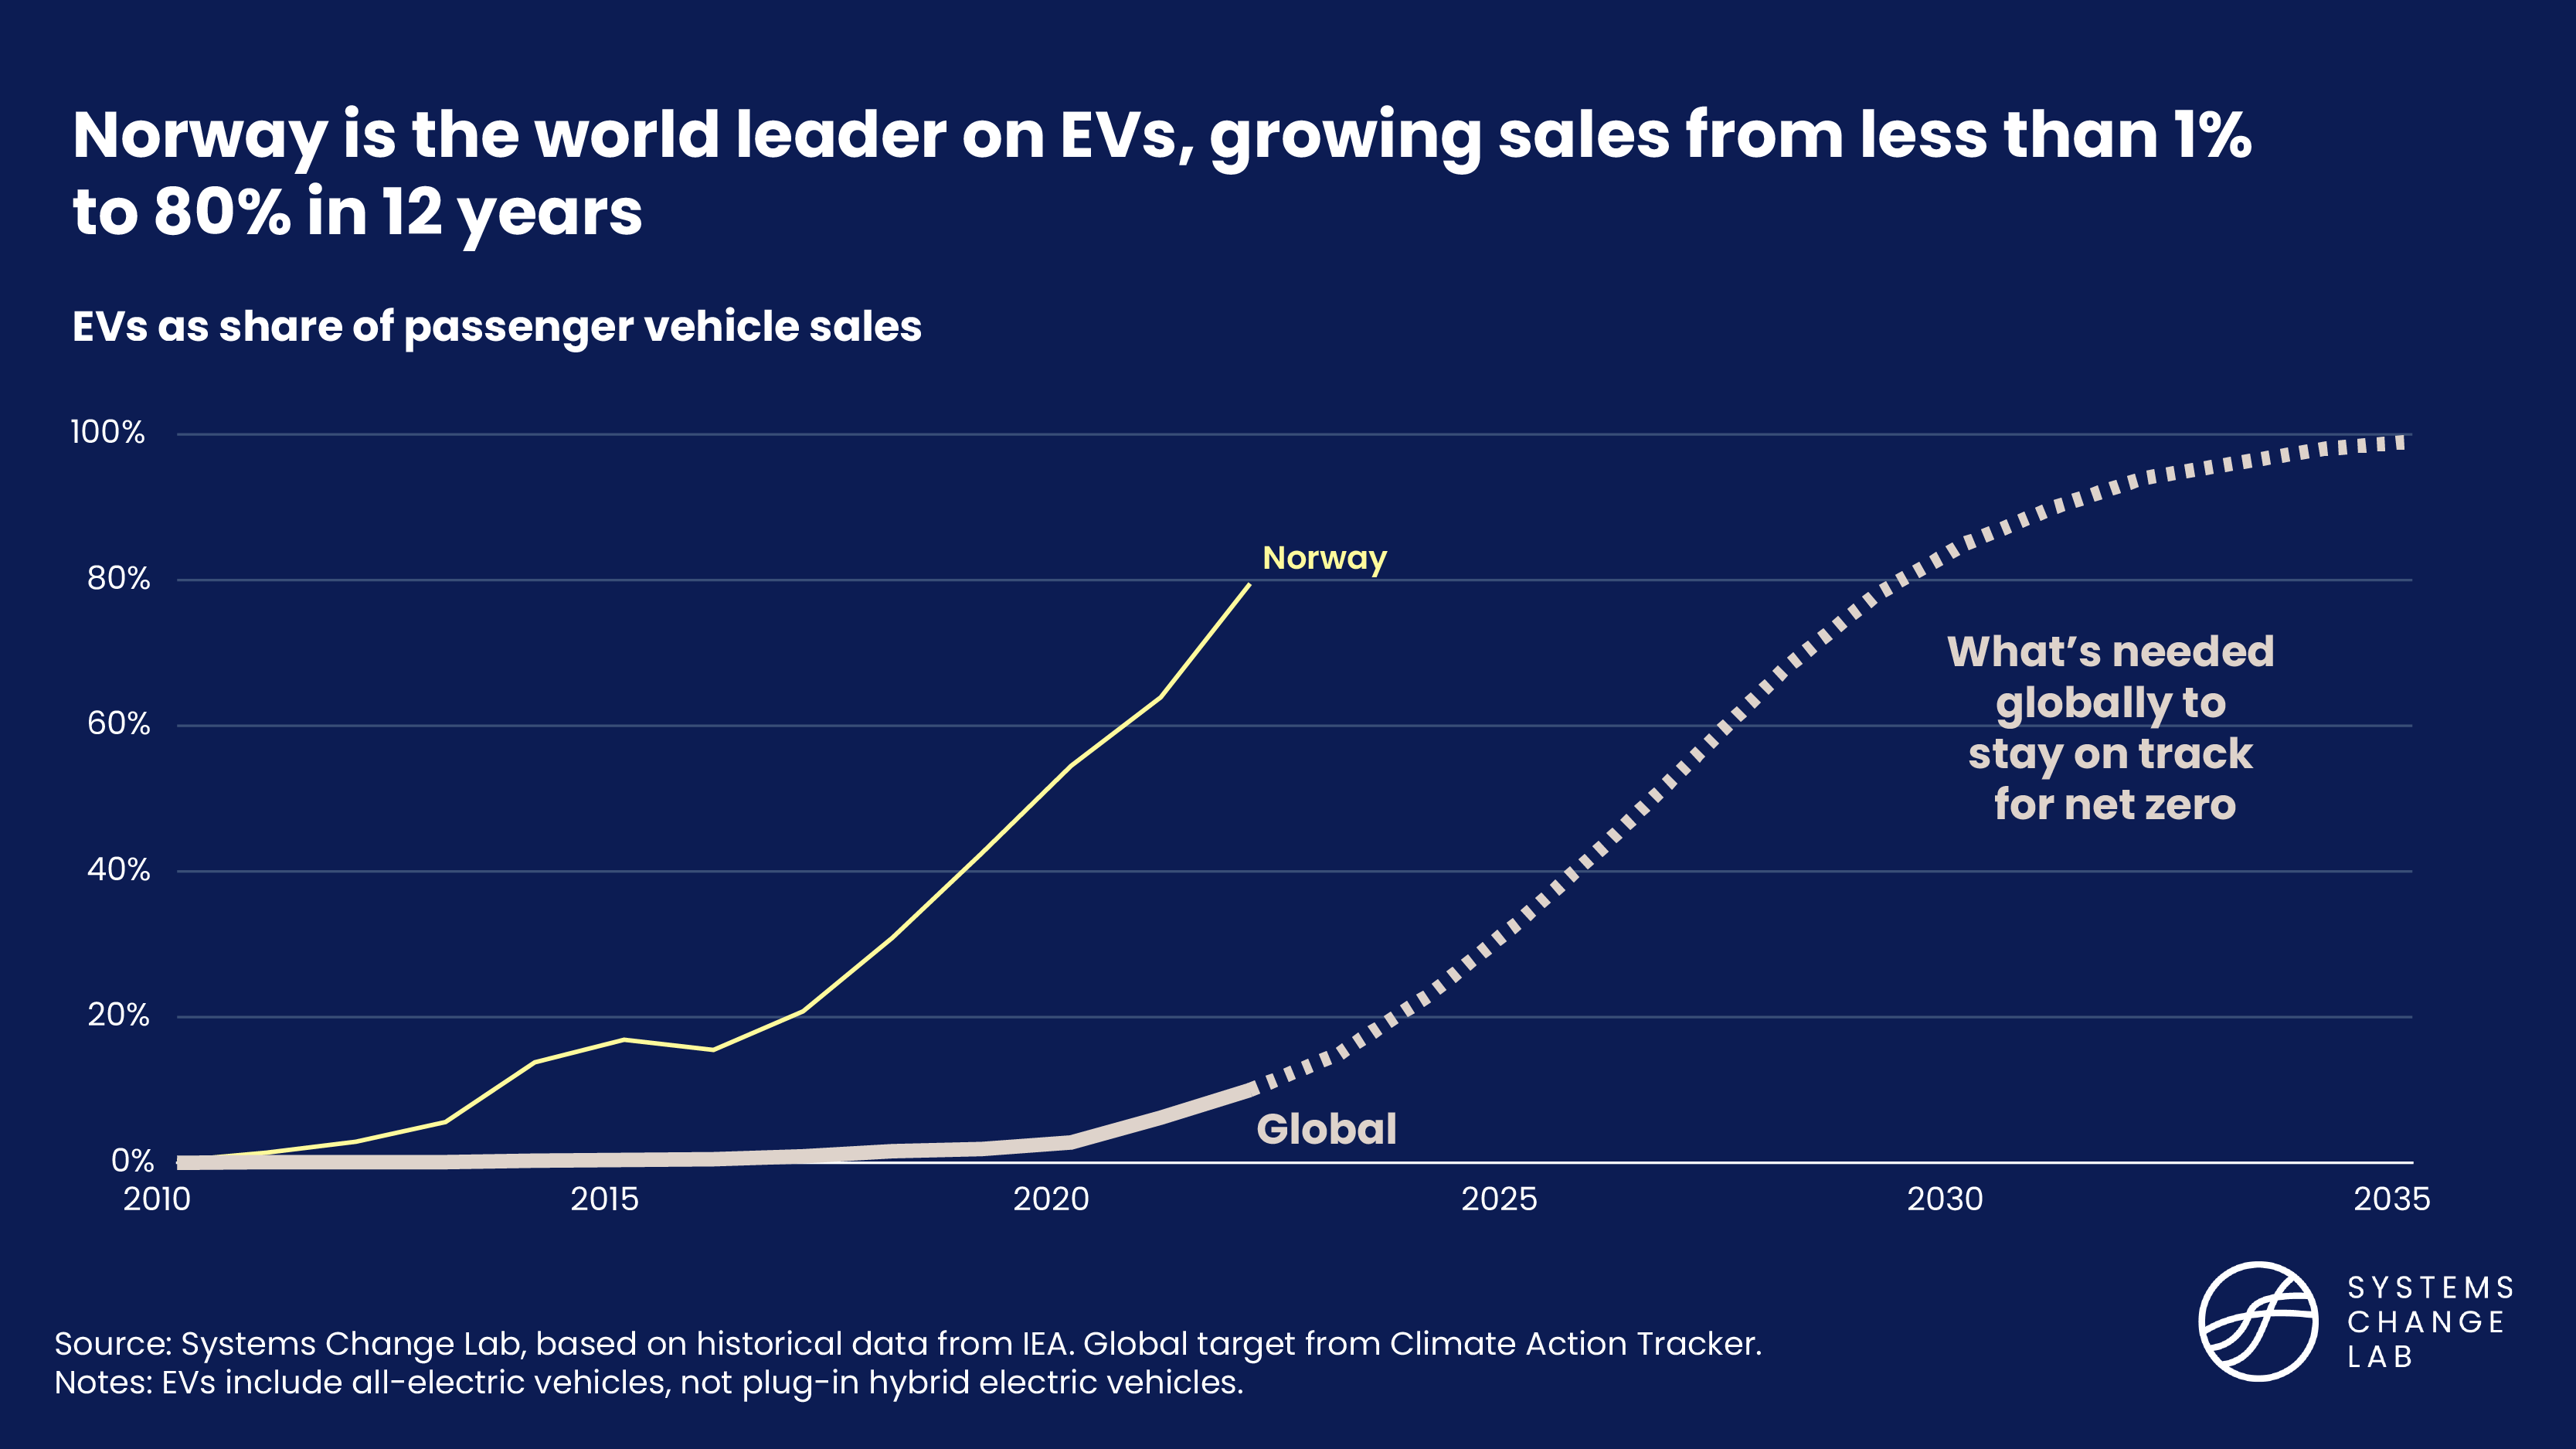 Norway is the world leader on Electric Vehicles, growing sales from less than 1% to 80% in 12 years